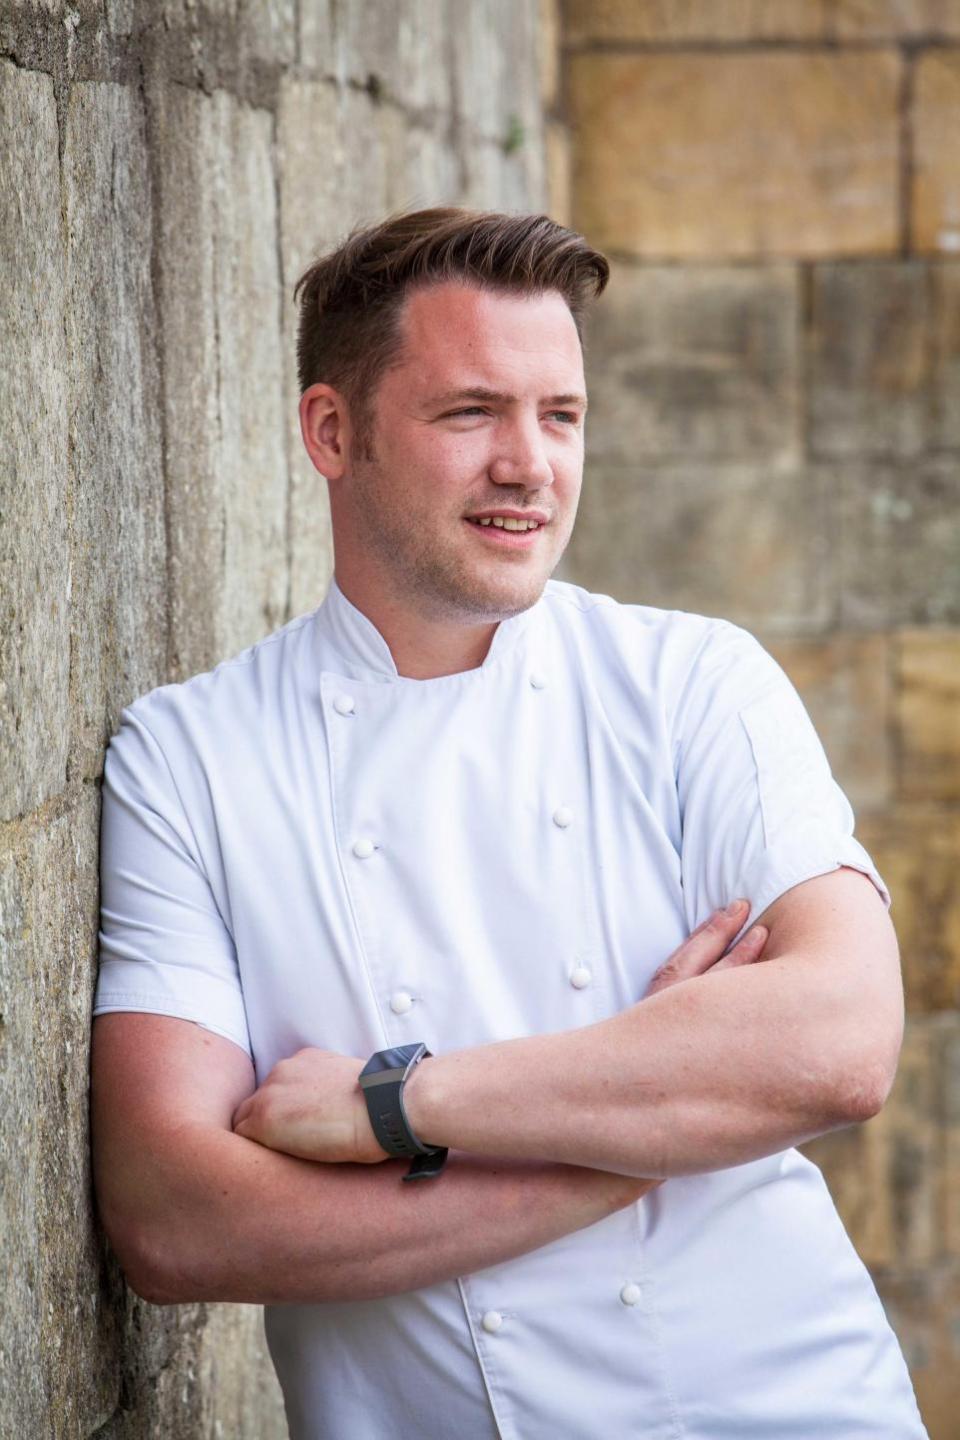 Popular York chef features on pop star's podcast